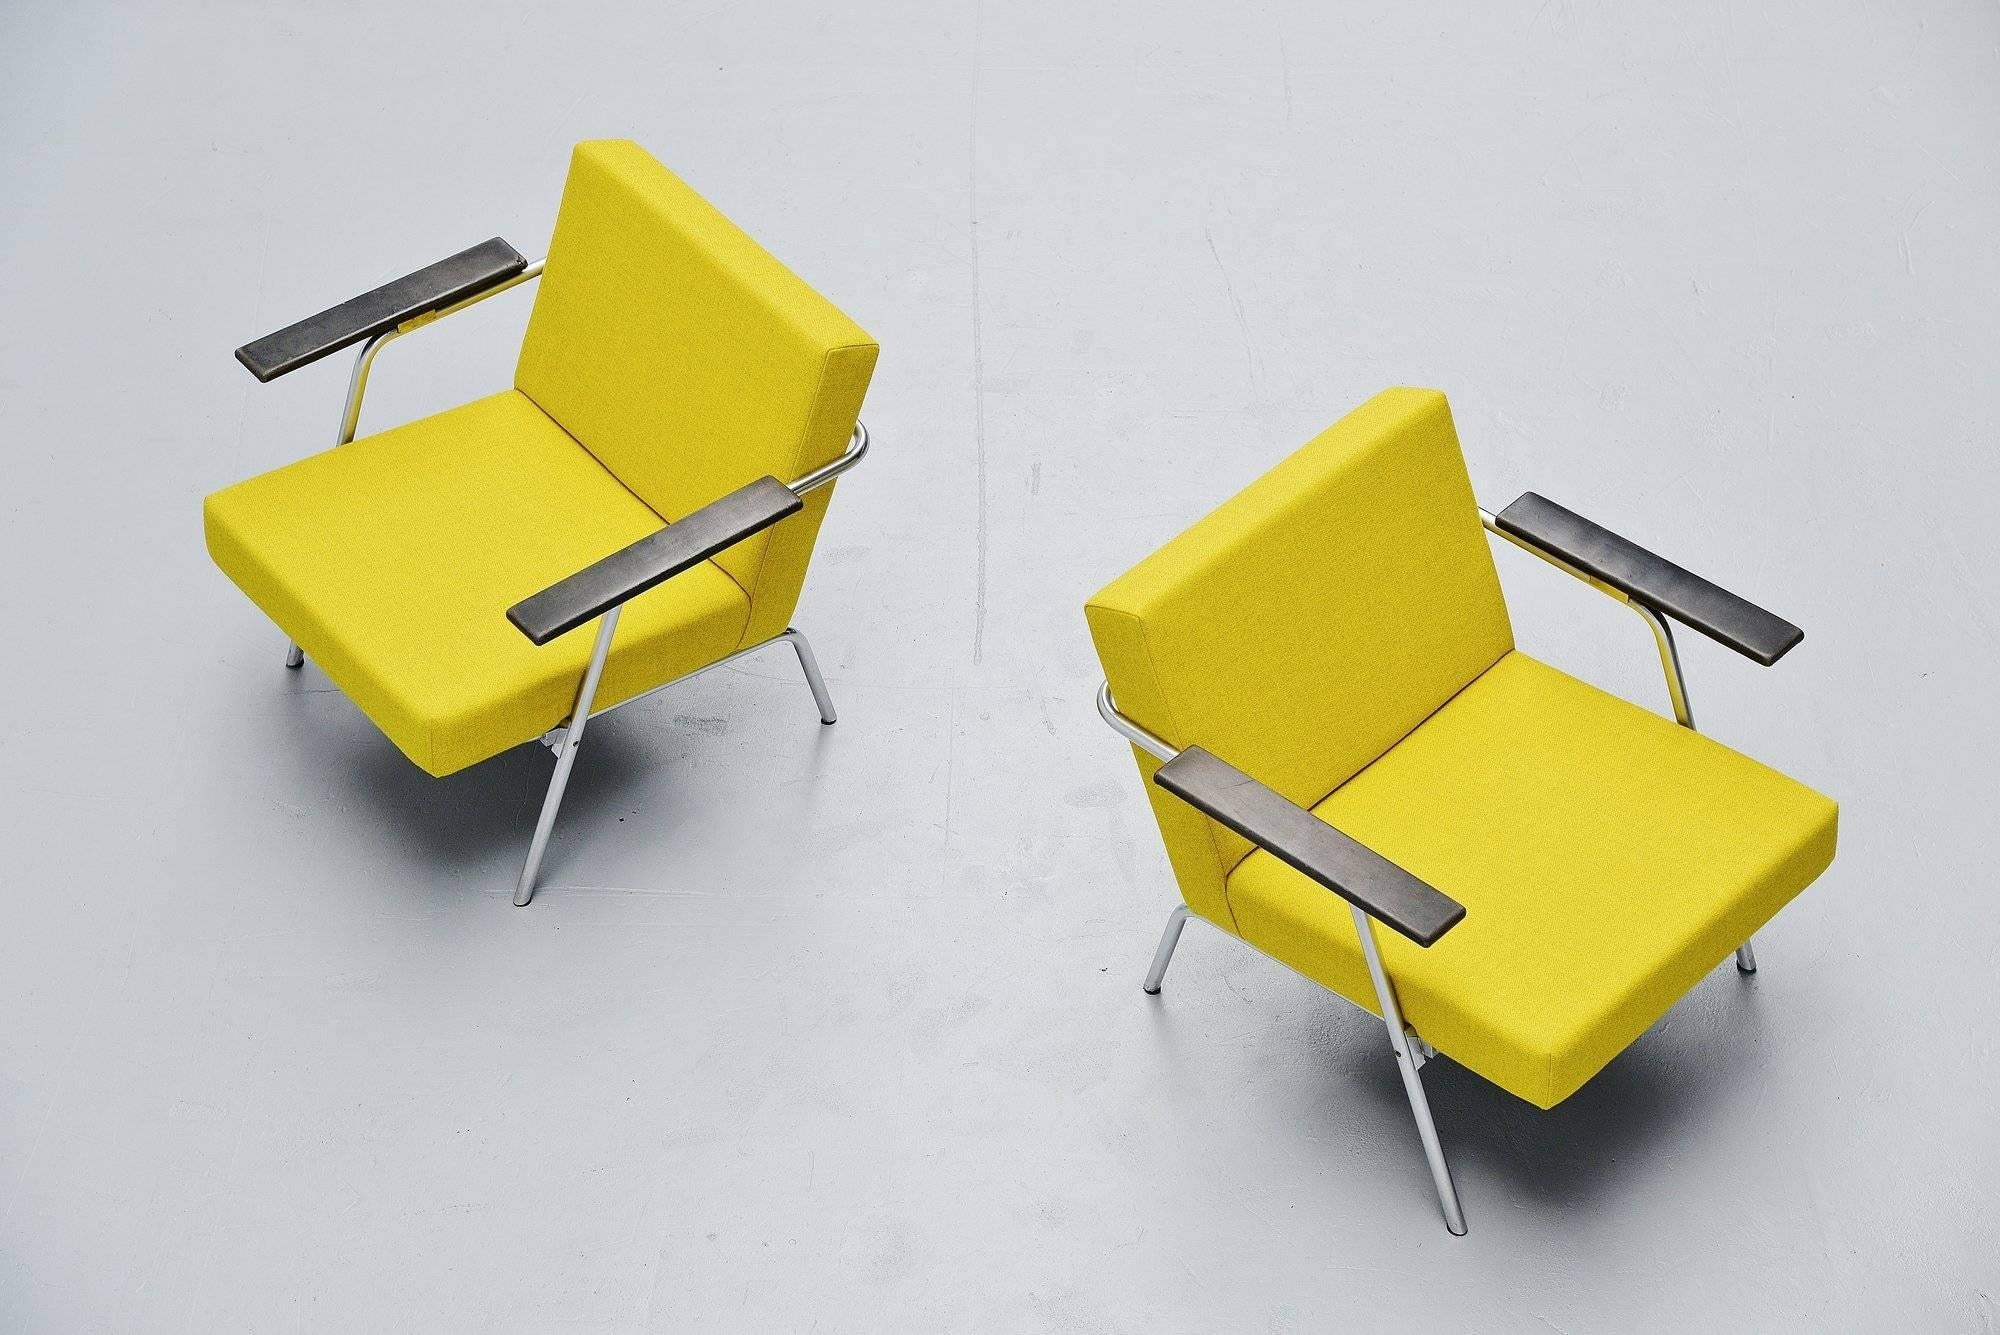 Rare and amazing pair of easy chairs by Martin Visser for 't Spectrum, Holland, 1964. These chairs are model SZ02, documented in several books and catalogues by ‘t Spectrum as model SZ02. These were only produced from 1964-1965 so they are very hard